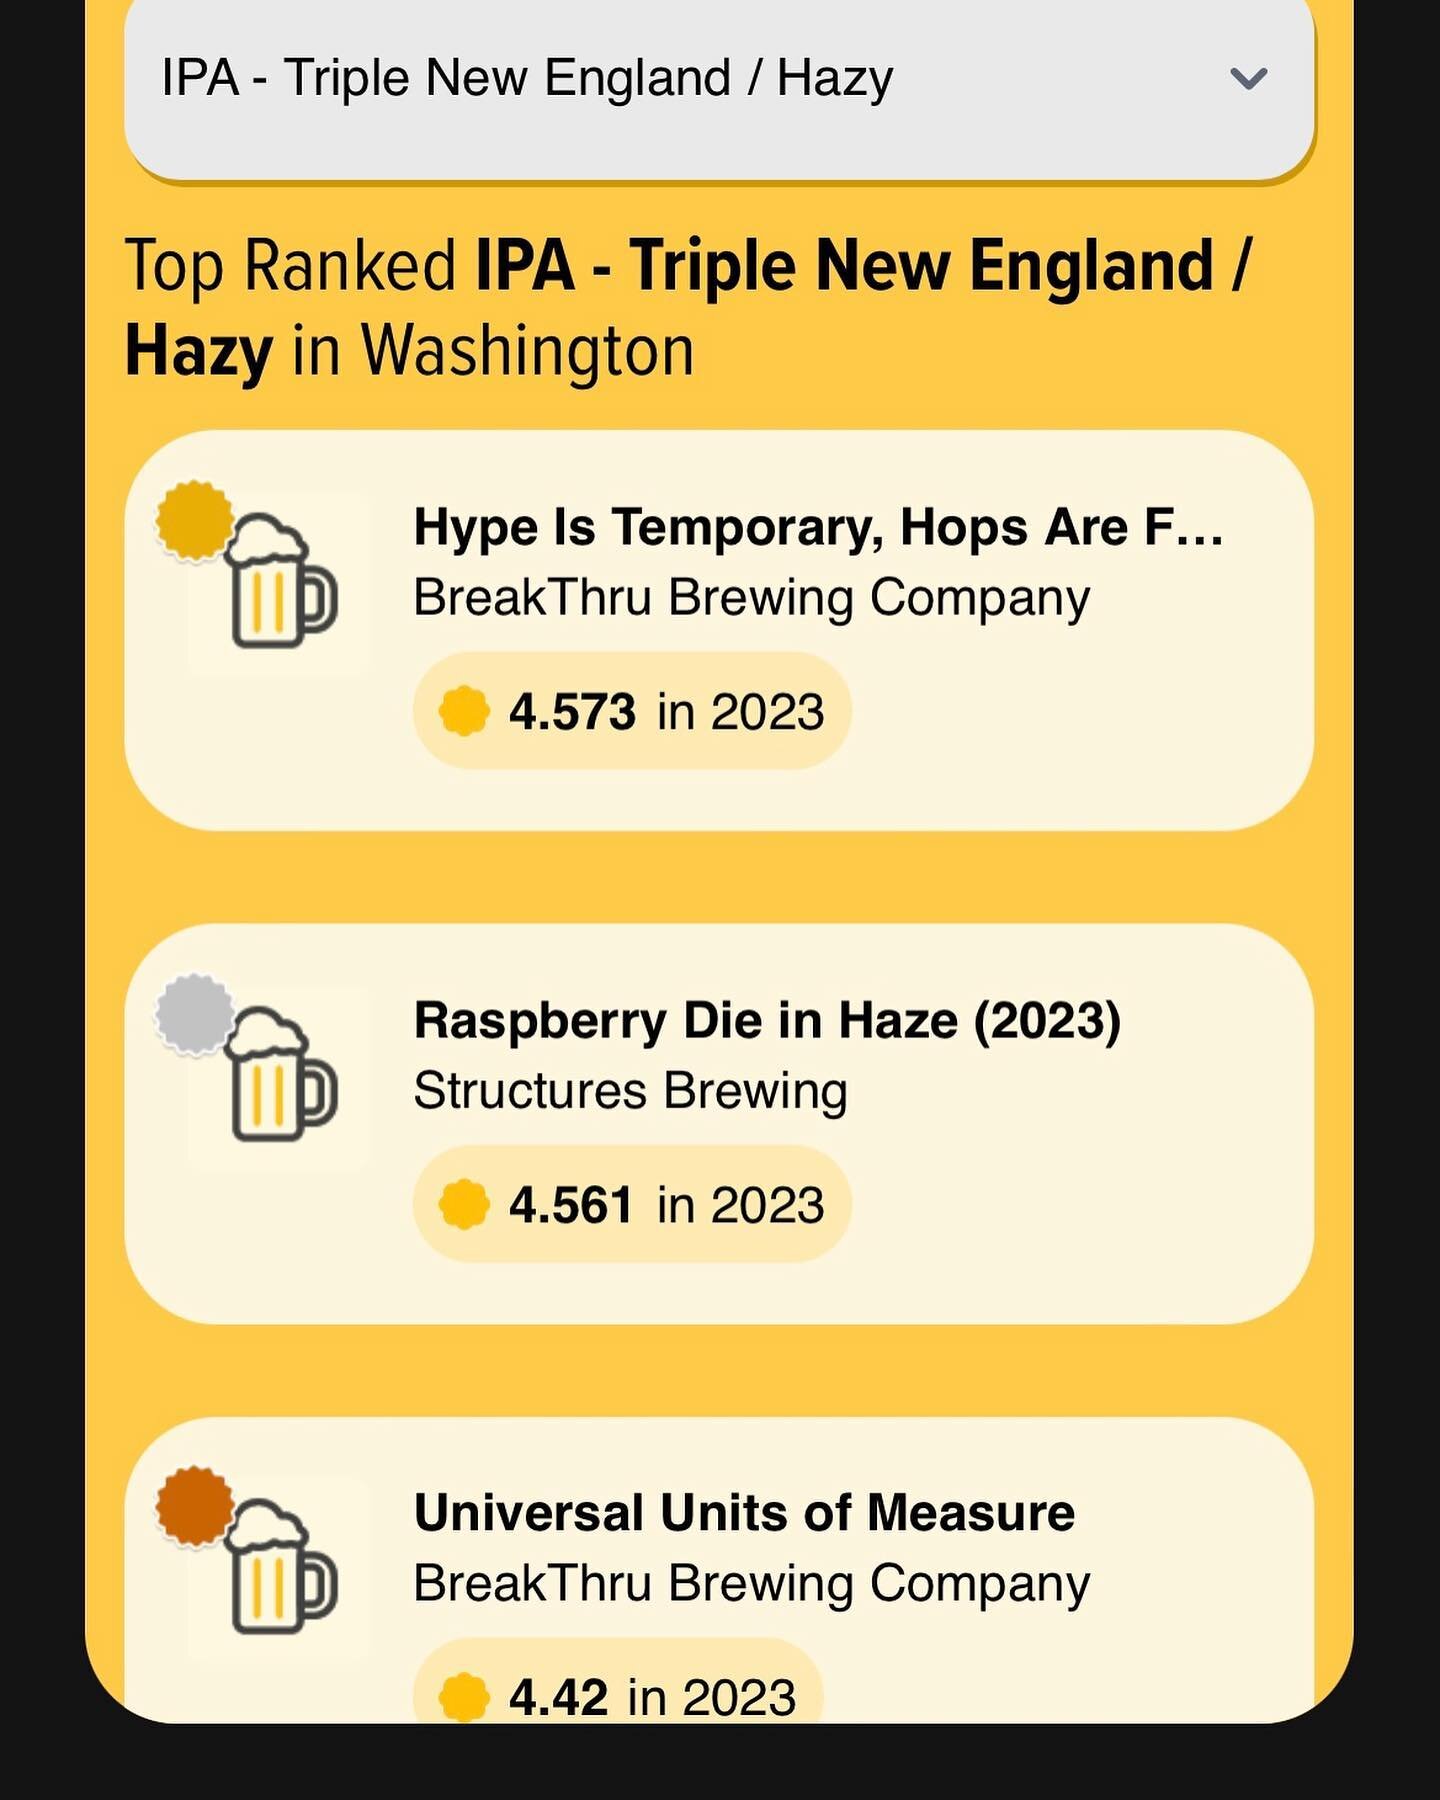 Honored to receive the email today that our @sheltonbrewing and @musicalboxbrewing Triple IPA Collab was awarded the top rated TIPA in Washington state by @untappd users in 2023. Excited and FLOORED to see the number 3 spot went to Universal Units of